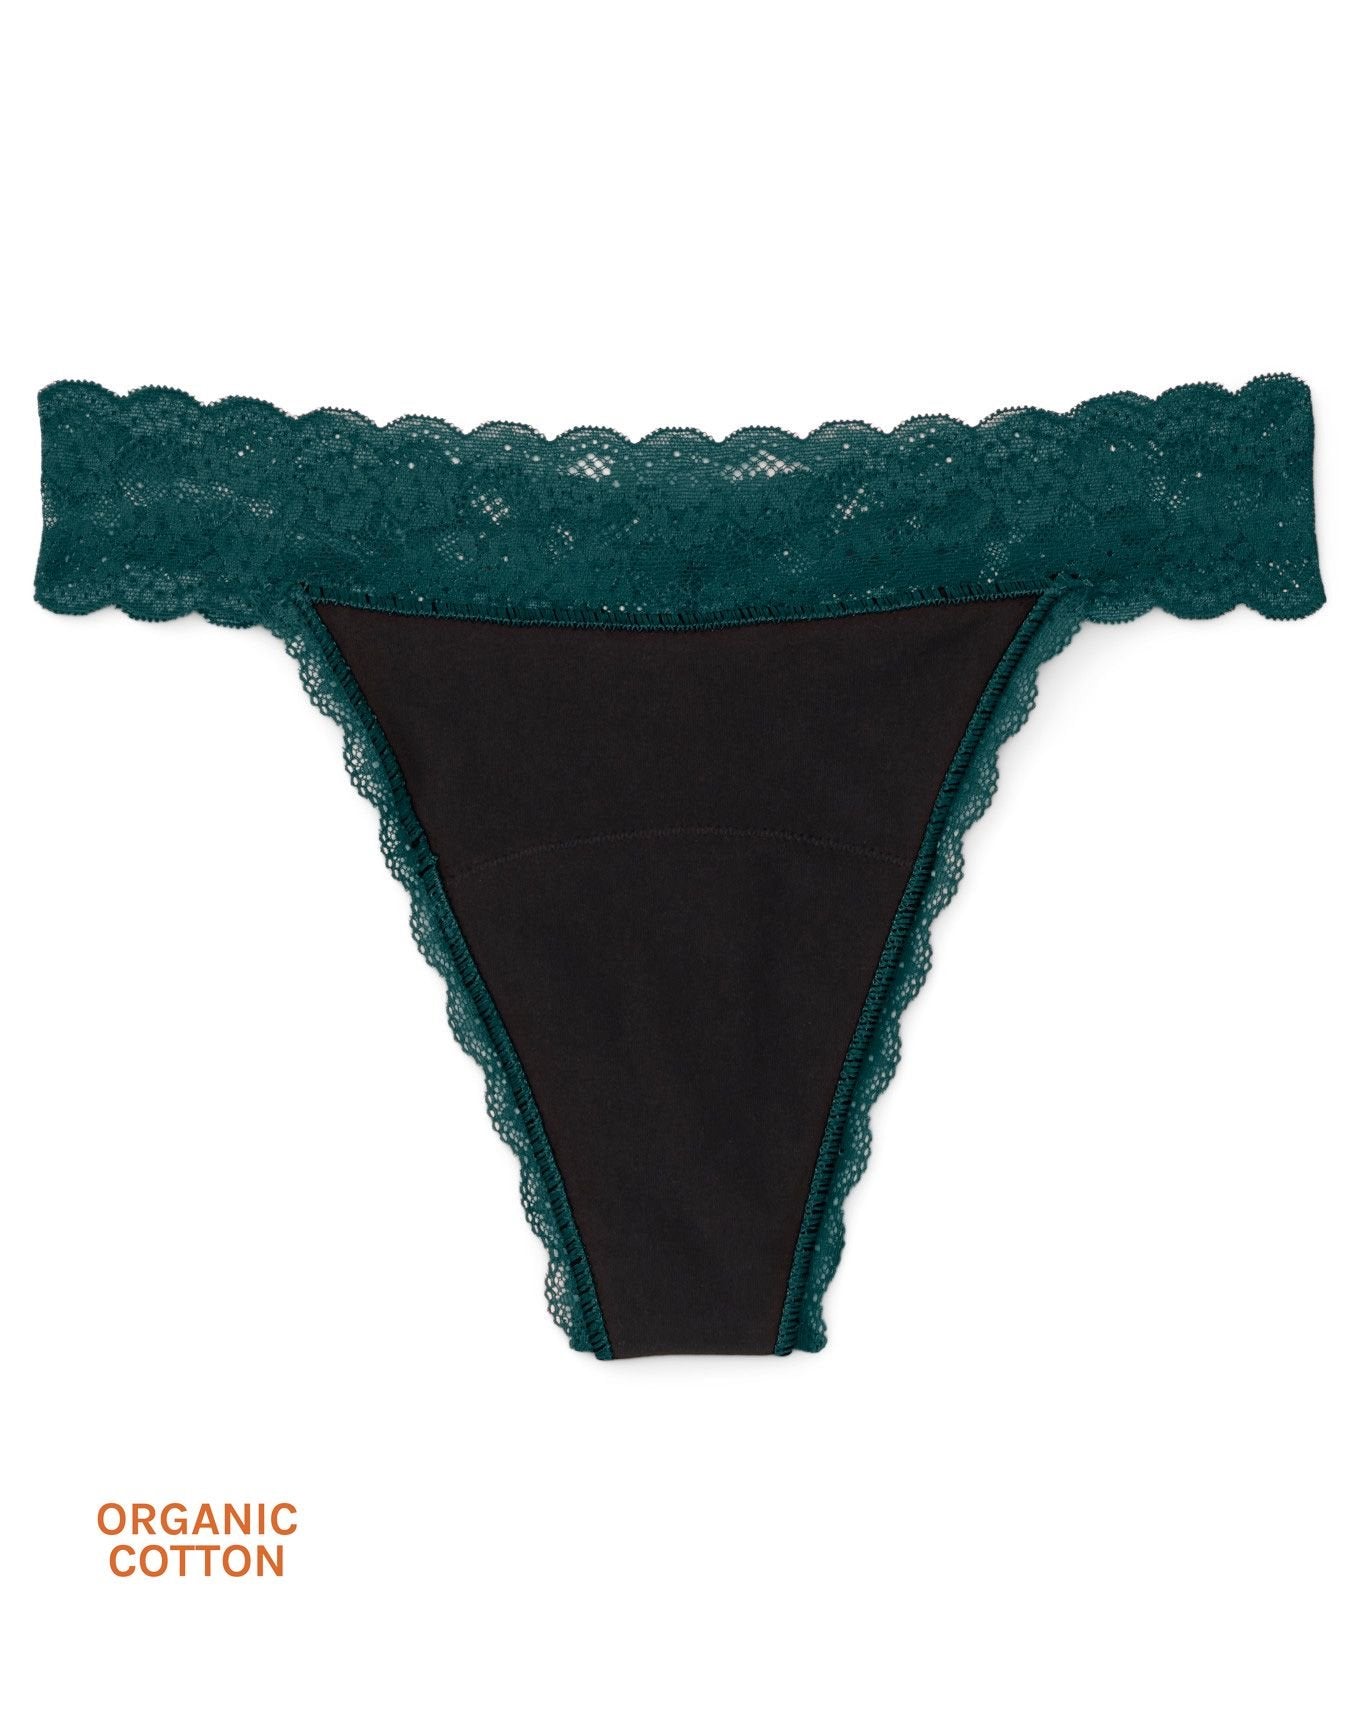 Joyja Lily period-proof panty in color Ponderosa Pine and shape thong